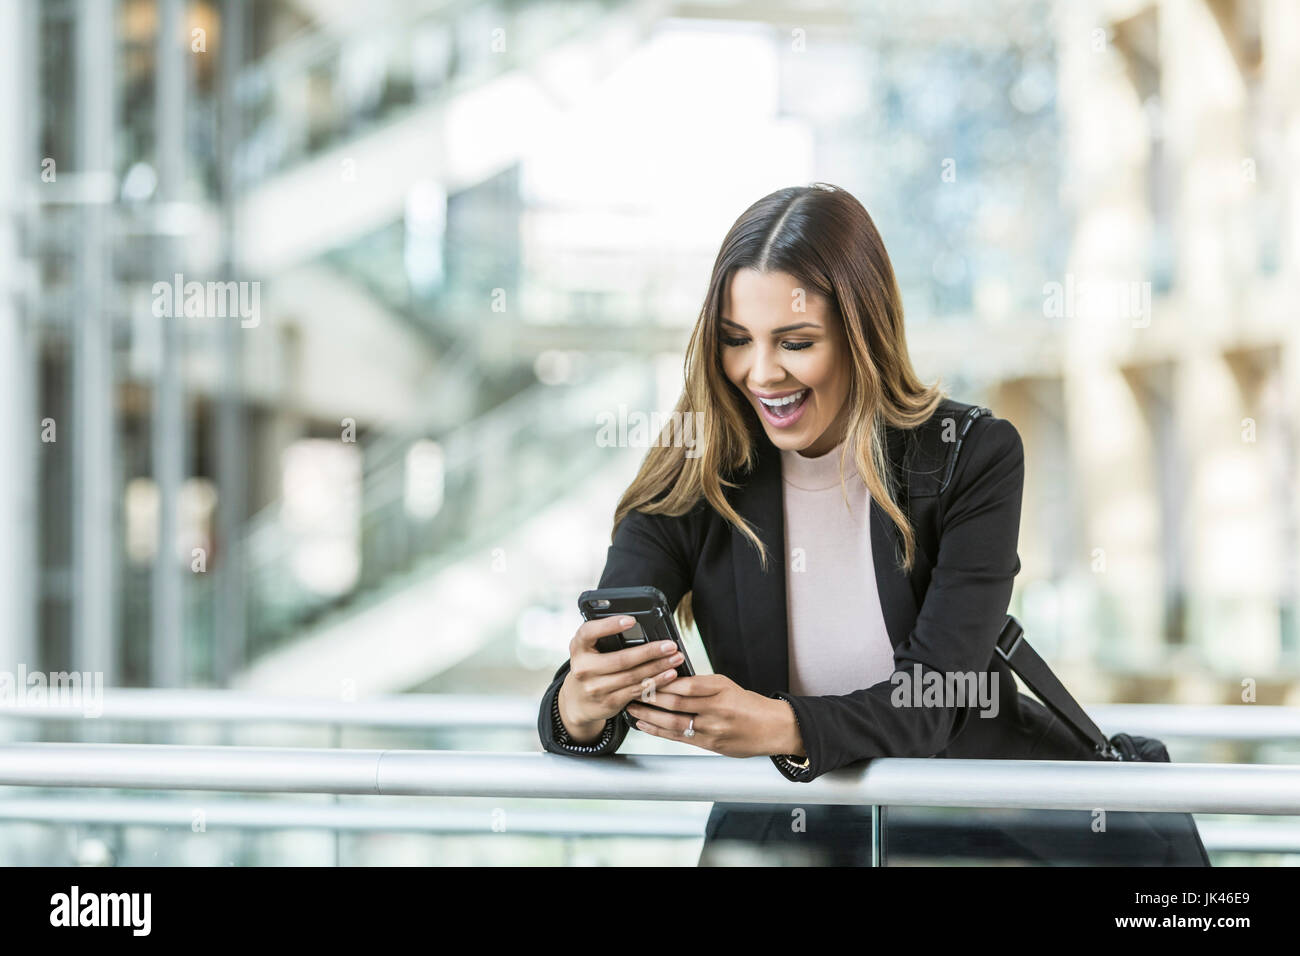 Mixed Race businesswoman texting on cell phone leaning on railing in lobby Stock Photo